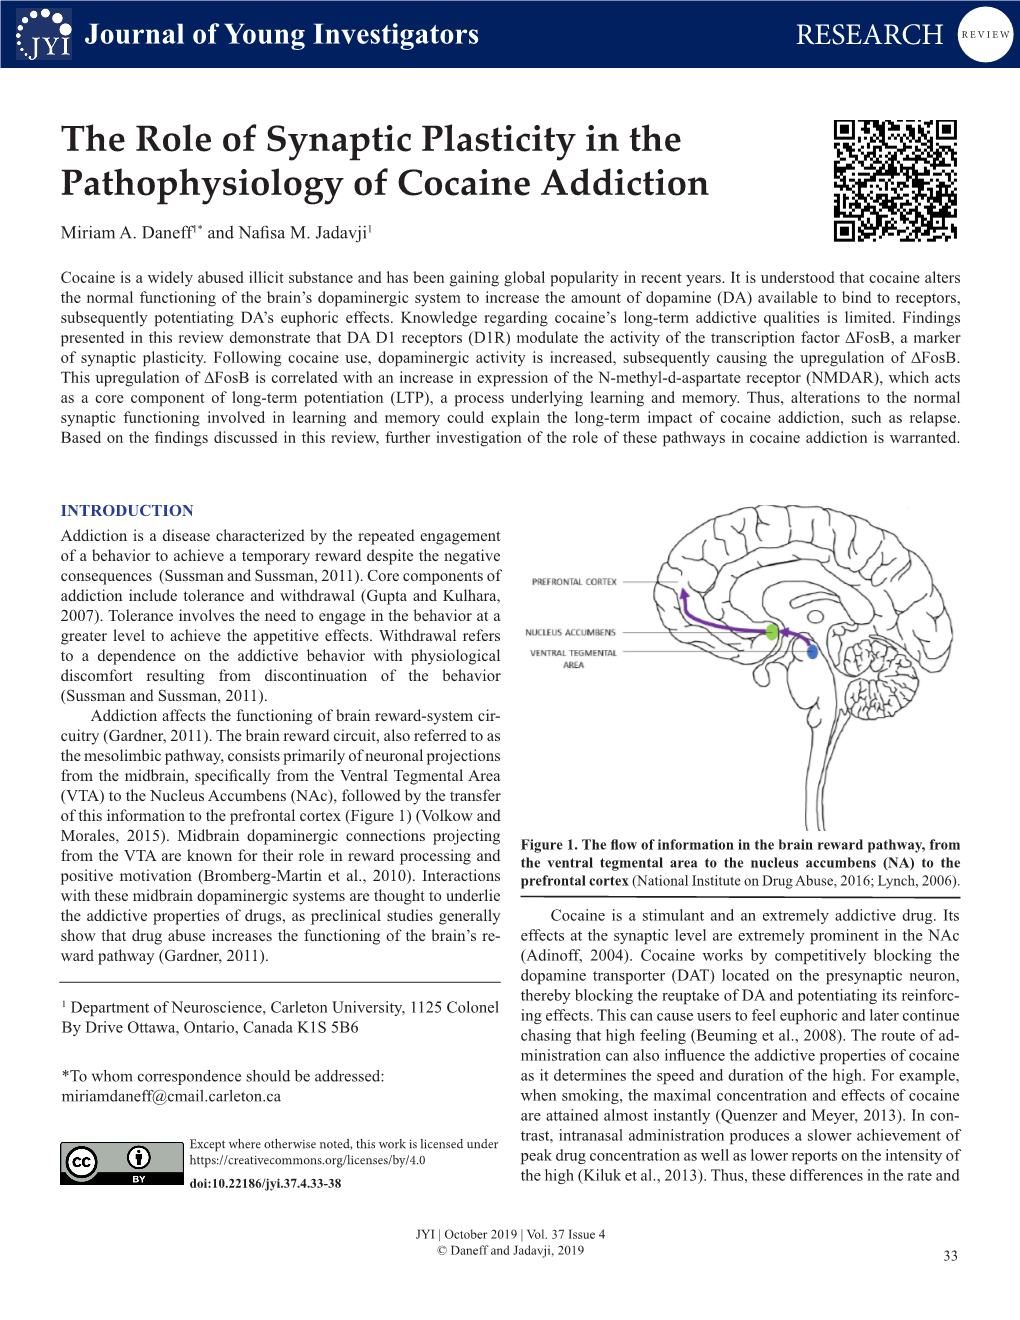 The Role of Synaptic Plasticity in the Pathophysiology of Cocaine Addiction Miriam A